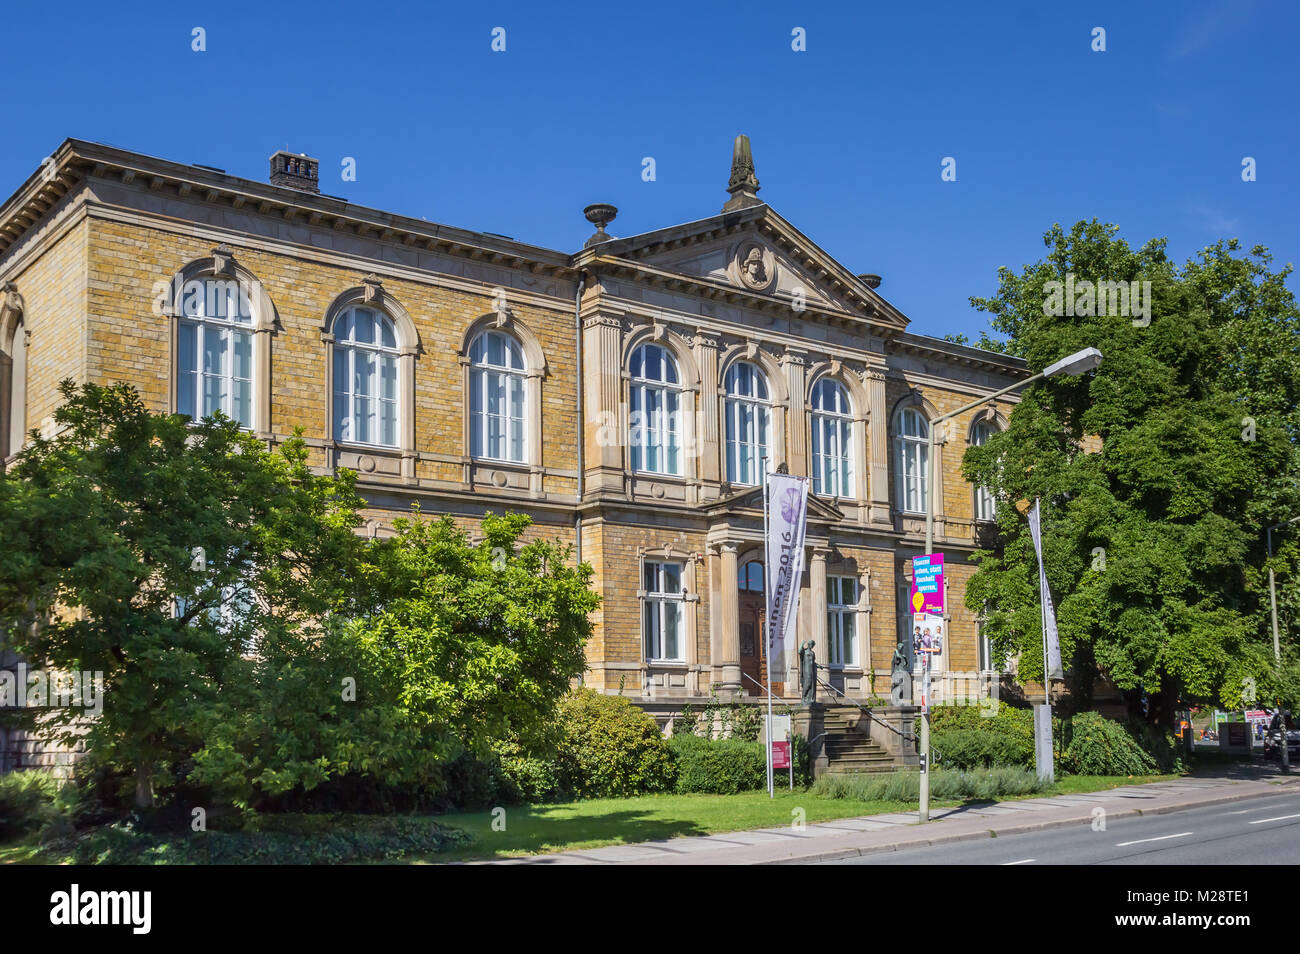 Old part of the Felix-Nussbaum-Haus museum in Osnabruck, Germany Stock Photo